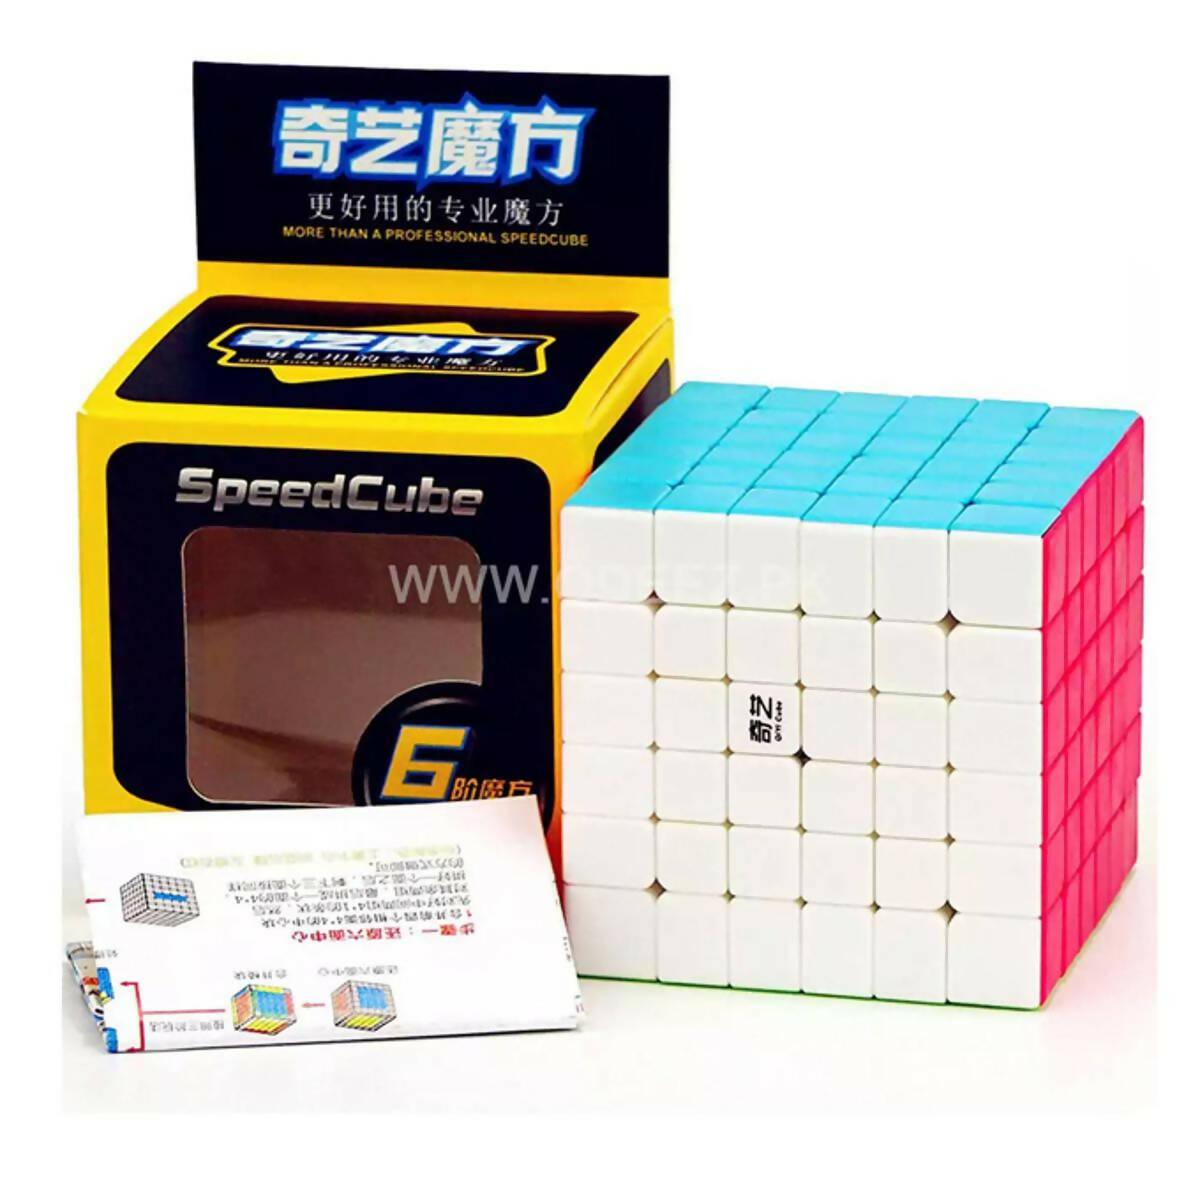 6x6 6 Rubiks Cube Sticker less High Speed Extra Smooth Puzzle - ValueBox